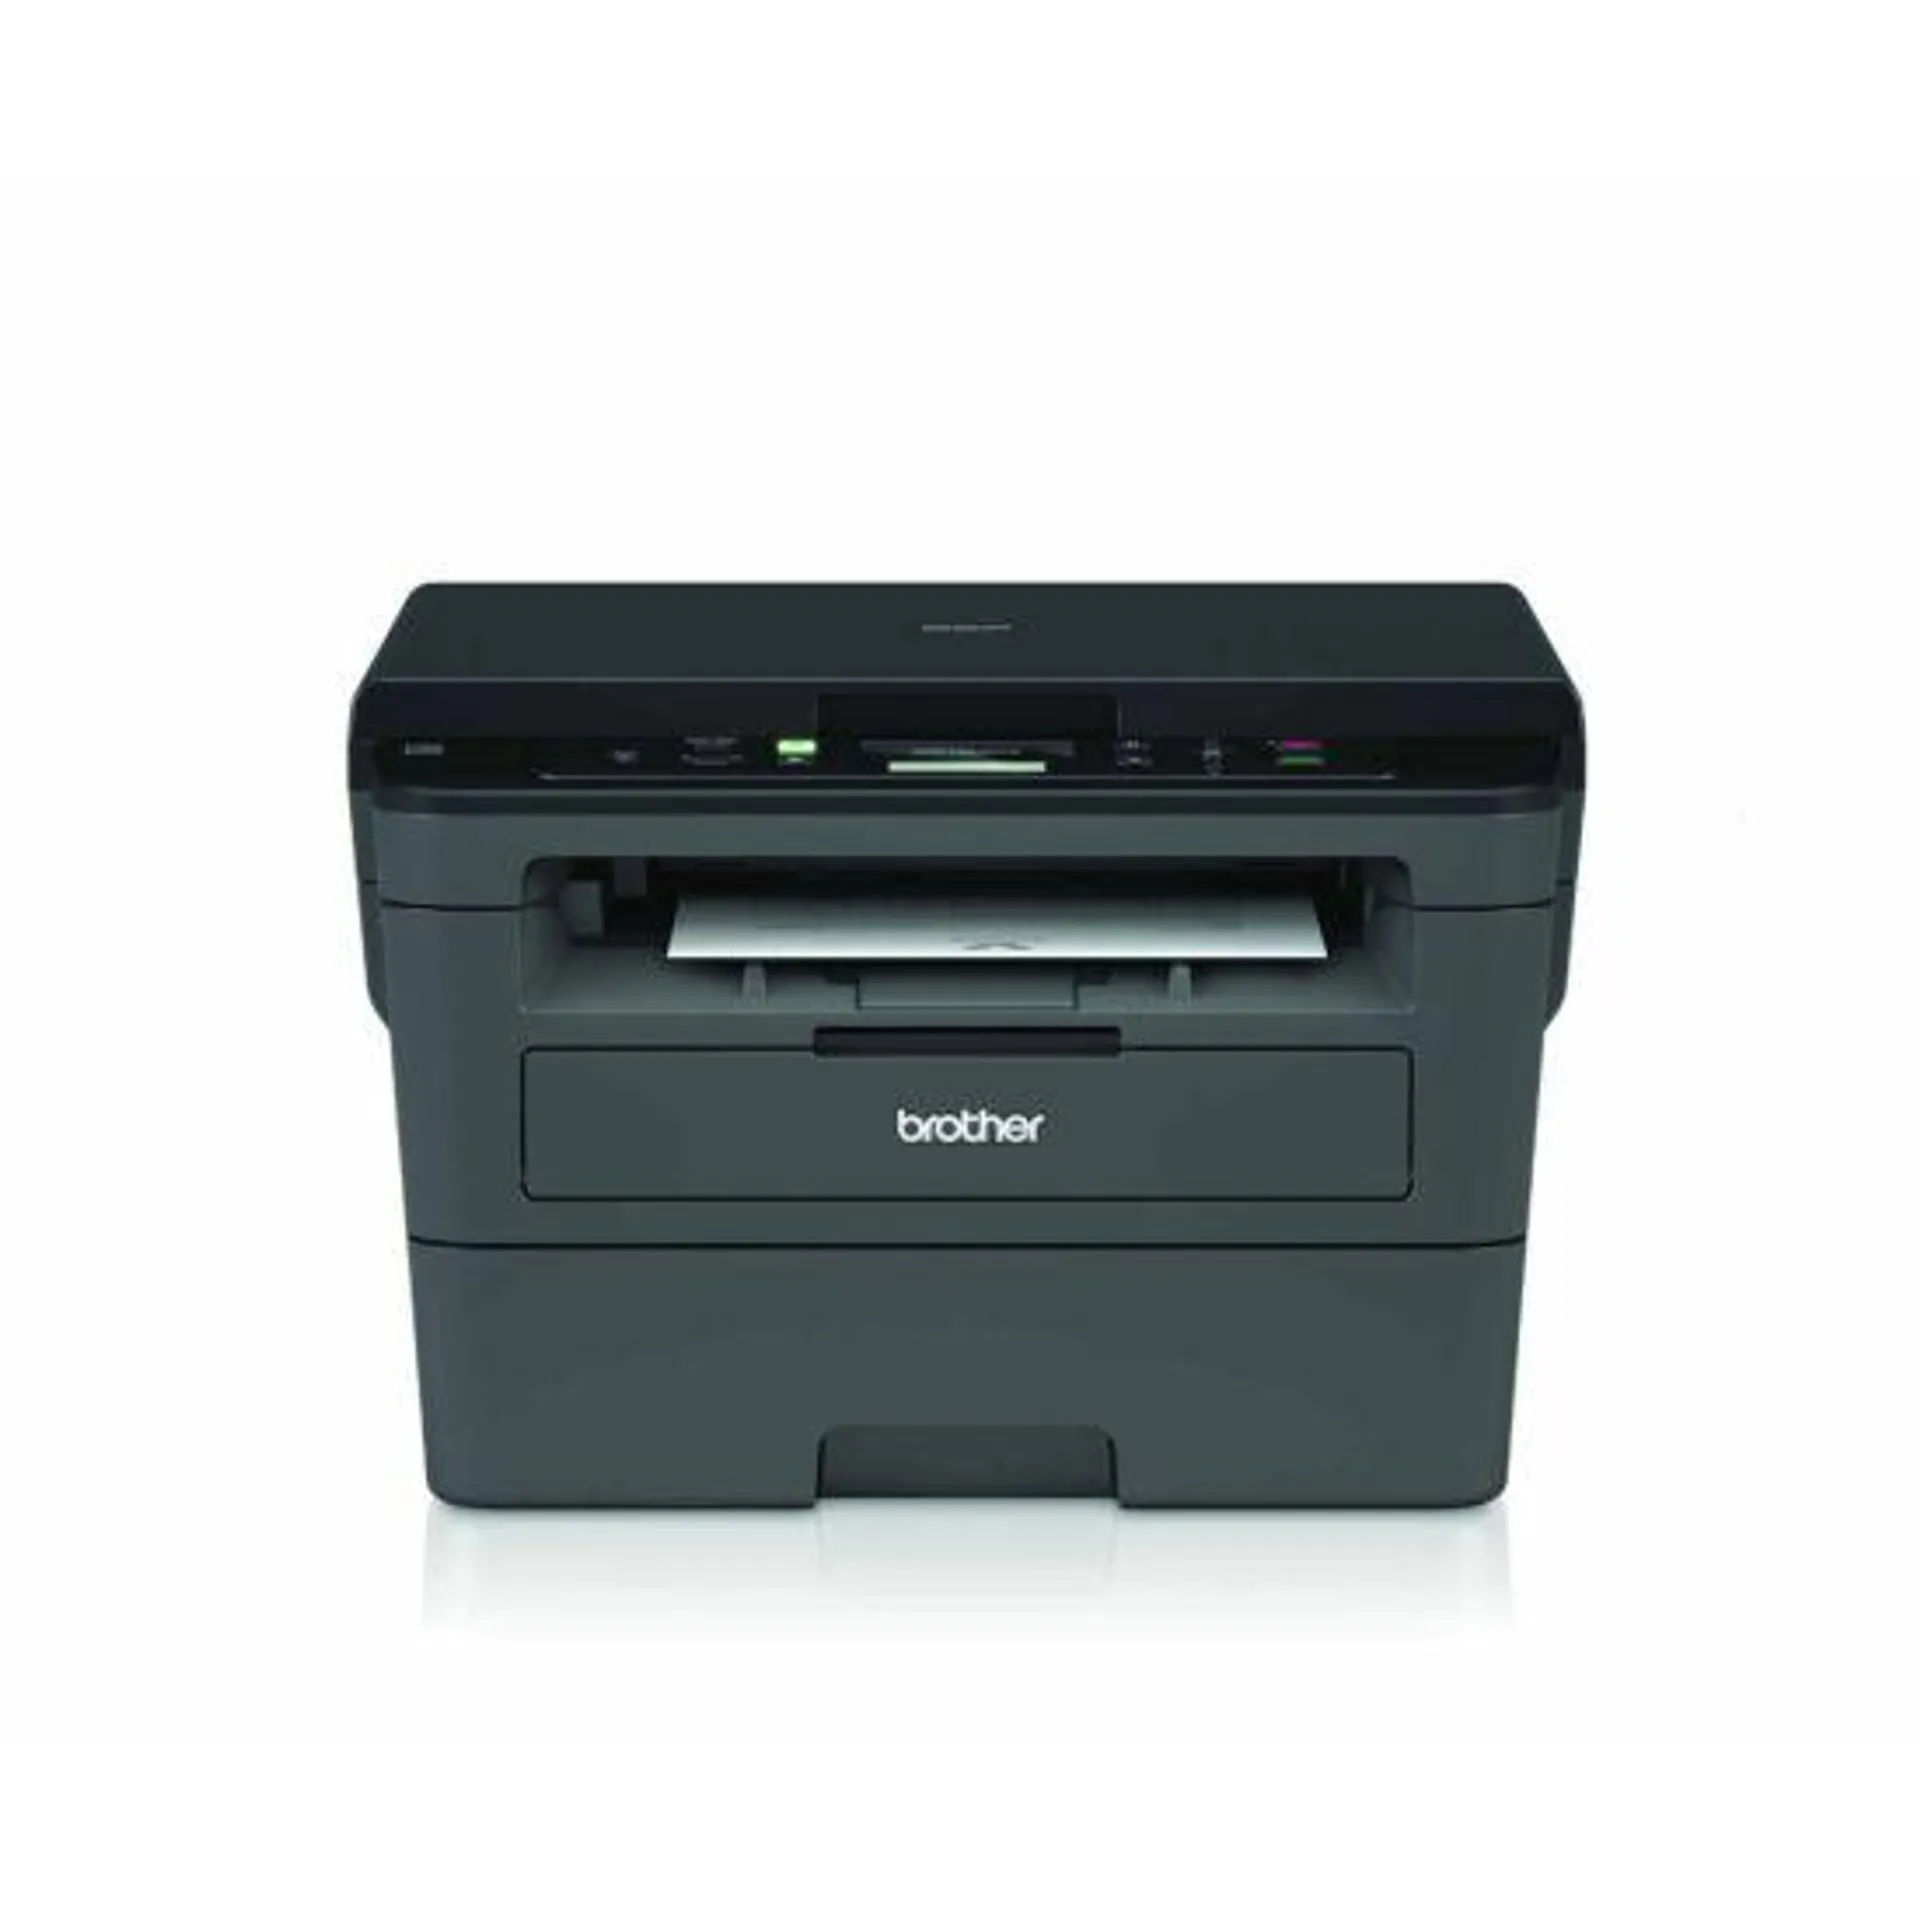 Brother DCP-L2530DW All in One Wireless Laser Printer